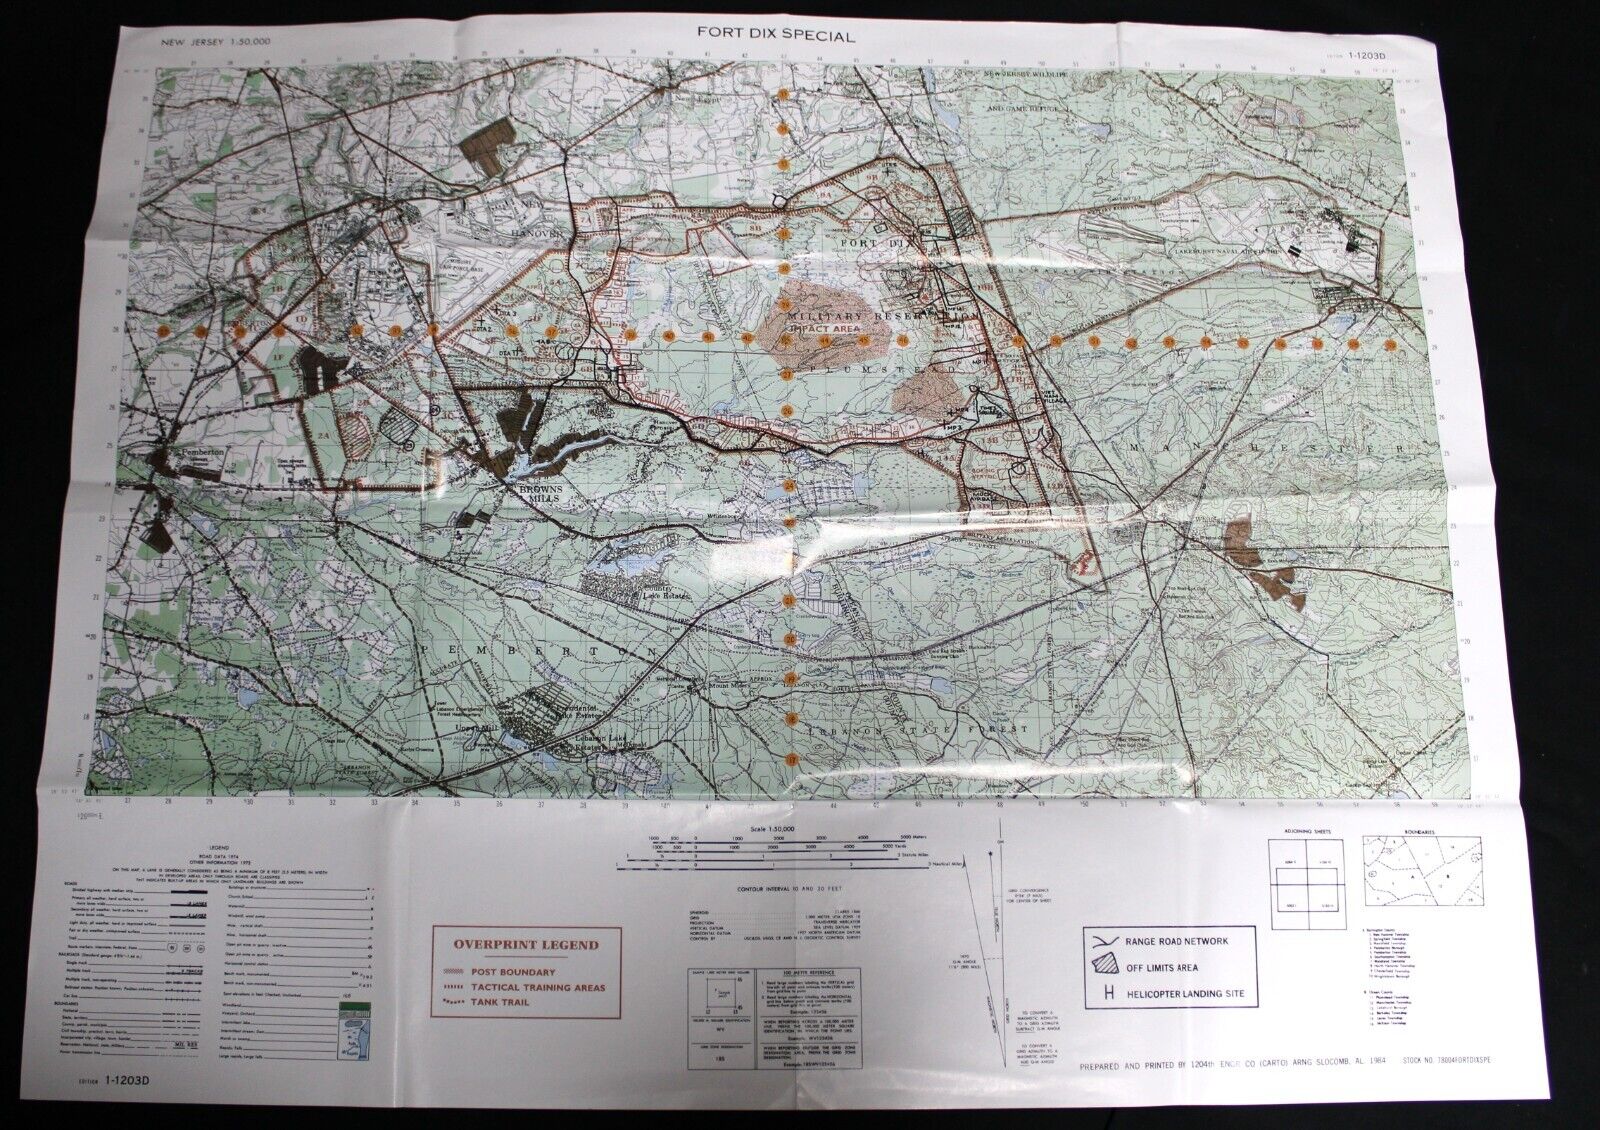 FORT DIX NEW JERSEY GROUNDS & ROAD TOPOGRAPHIC MAP 1984 VINTAGE U.S. ARMY ISSUE